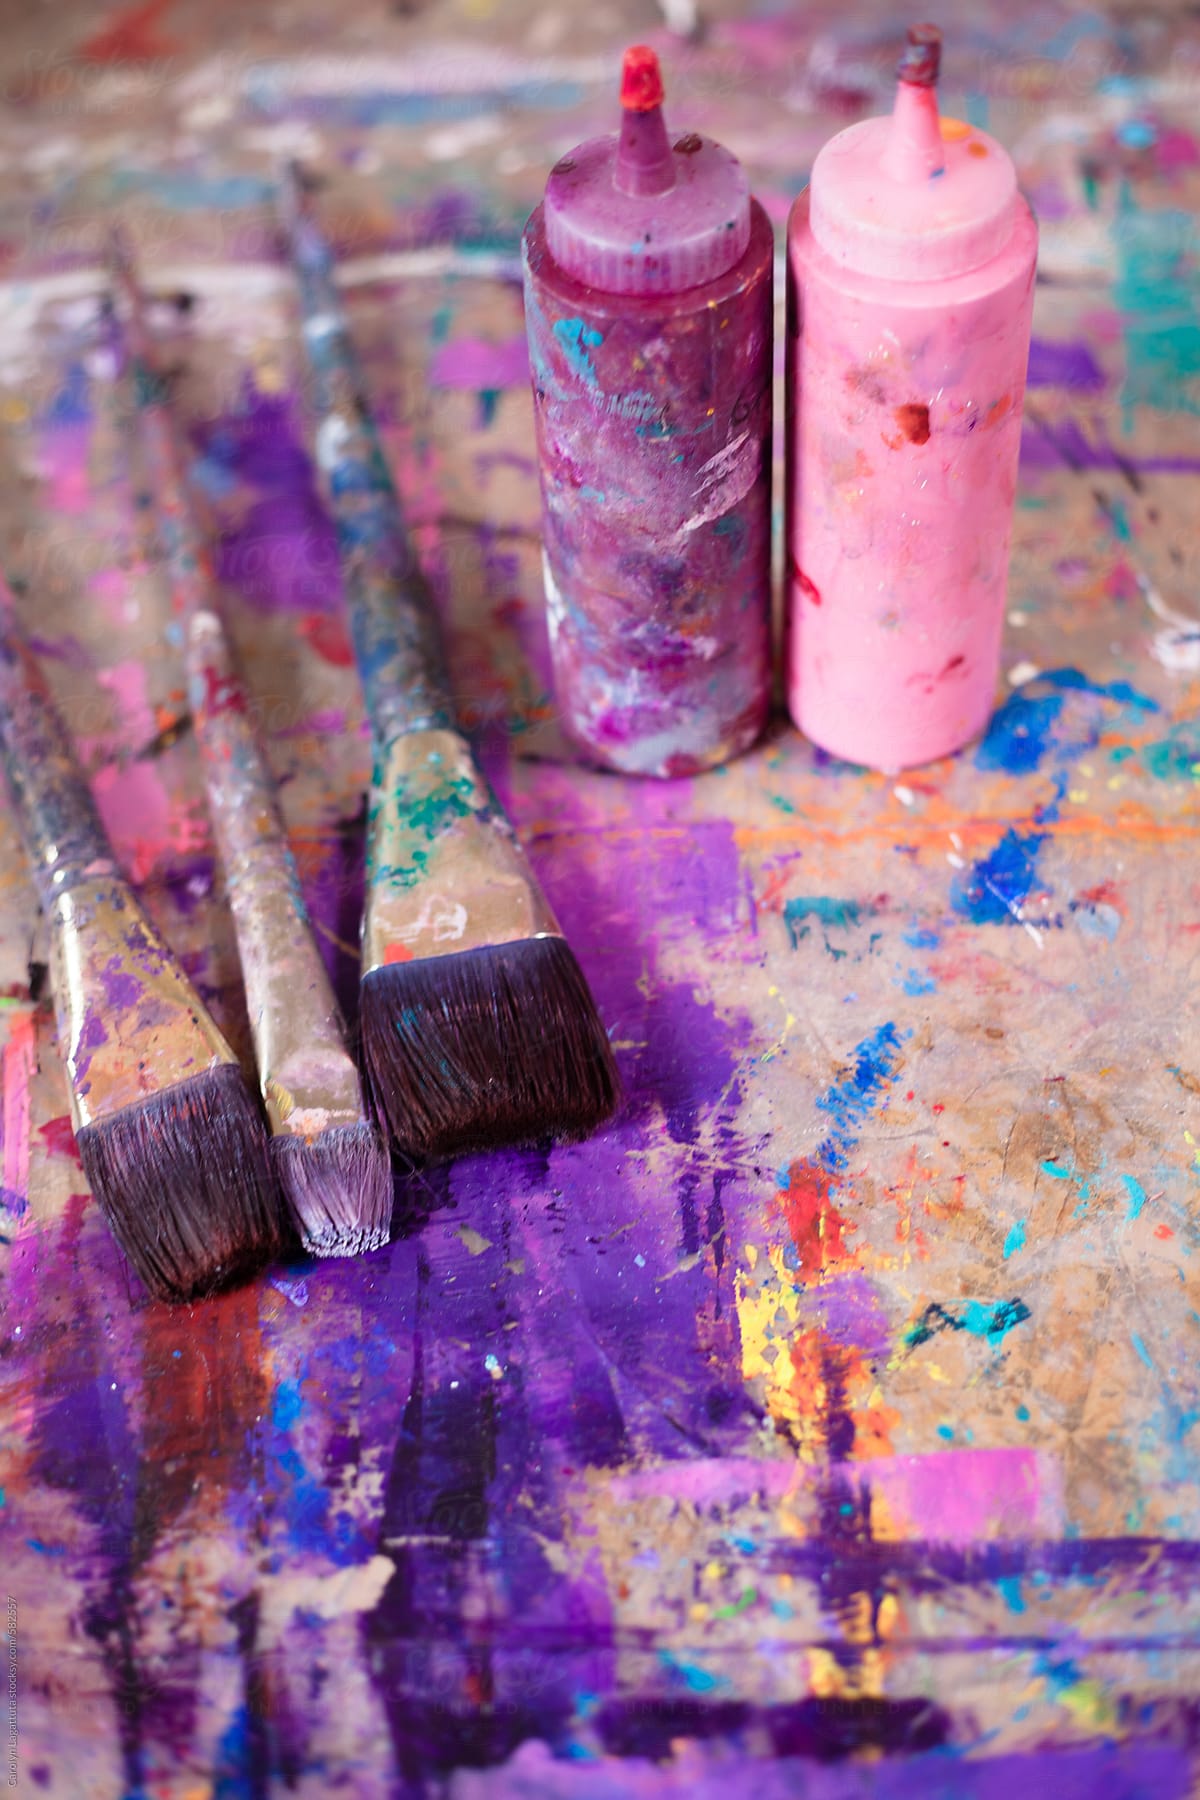 Used Paint Brushes Stained With All Colors In An Art Studio by Stocksy  Contributor Carolyn Lagattuta - Stocksy